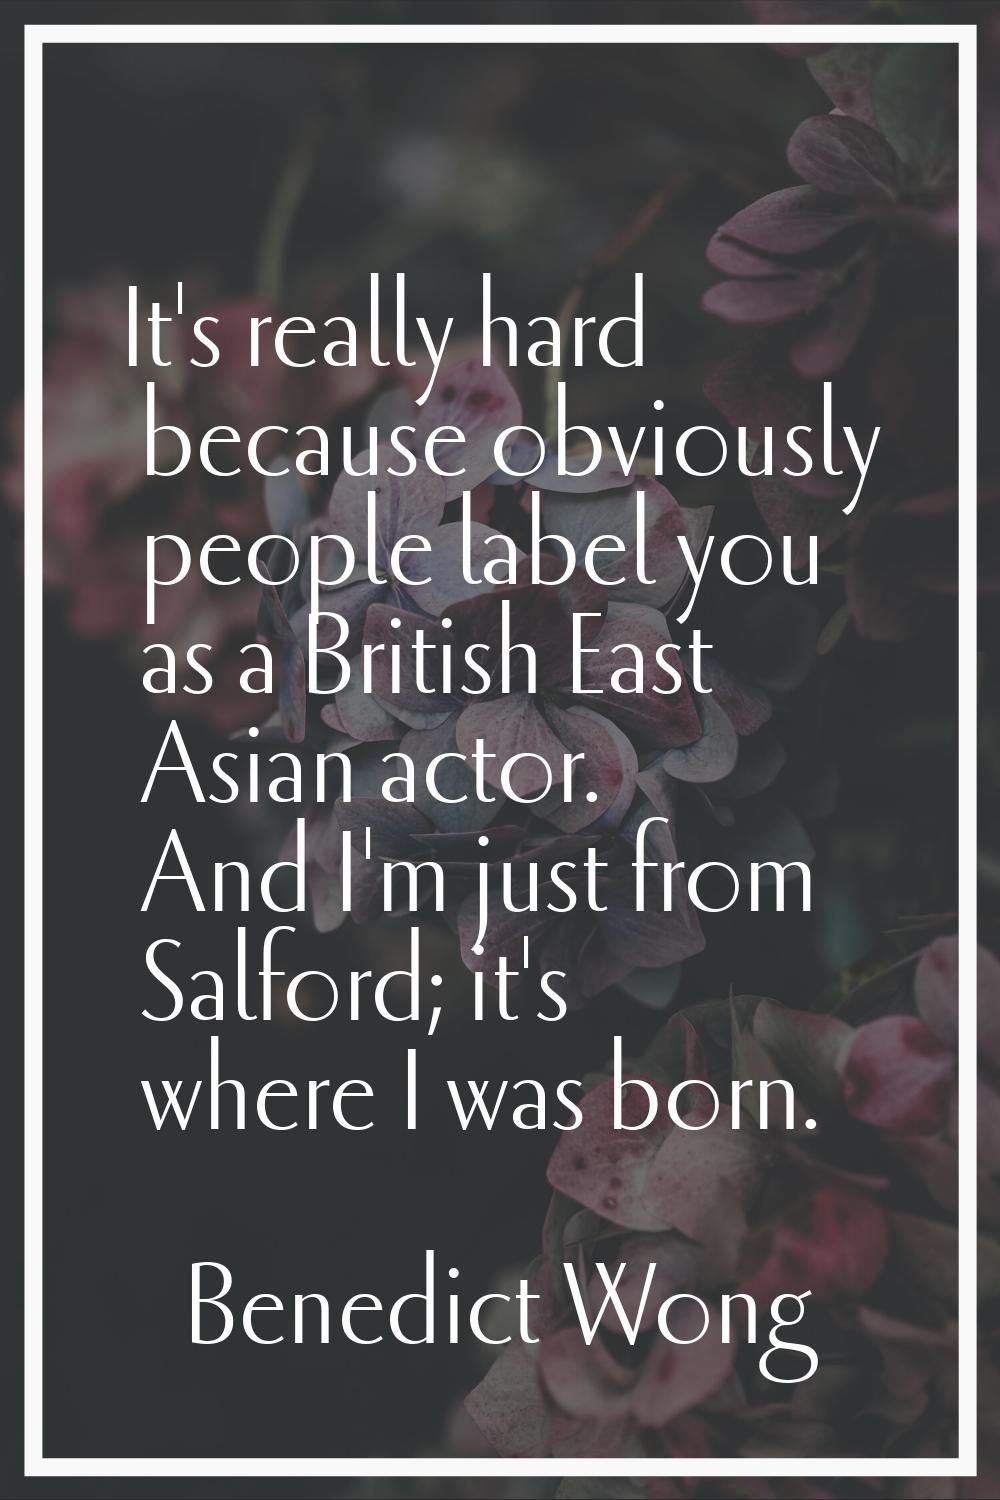 It's really hard because obviously people label you as a British East Asian actor. And I'm just fro